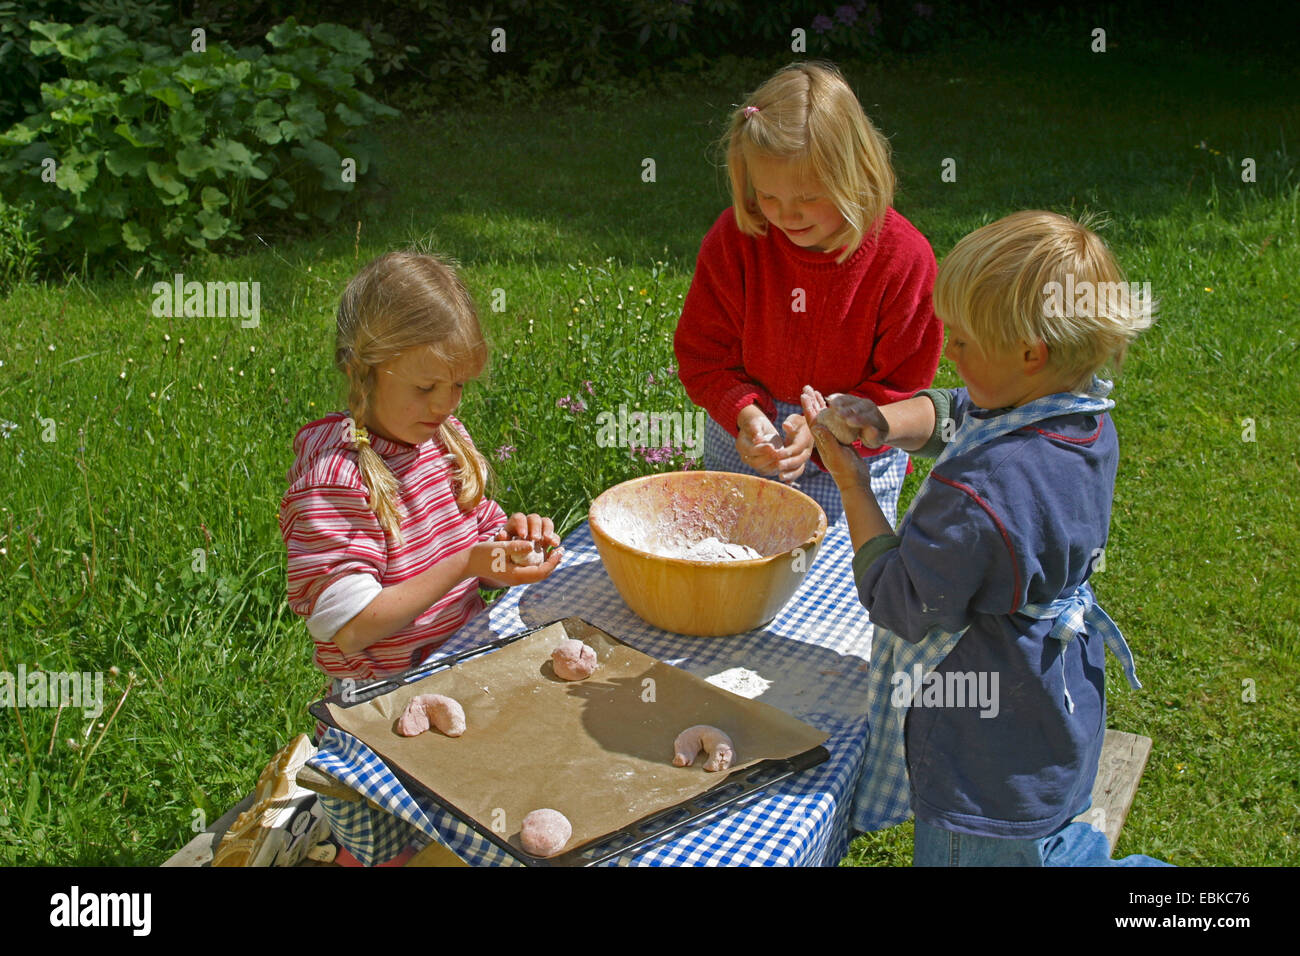 children baking dread fruit bread rolls out of bread dough and raspberries, Germany Stock Photo